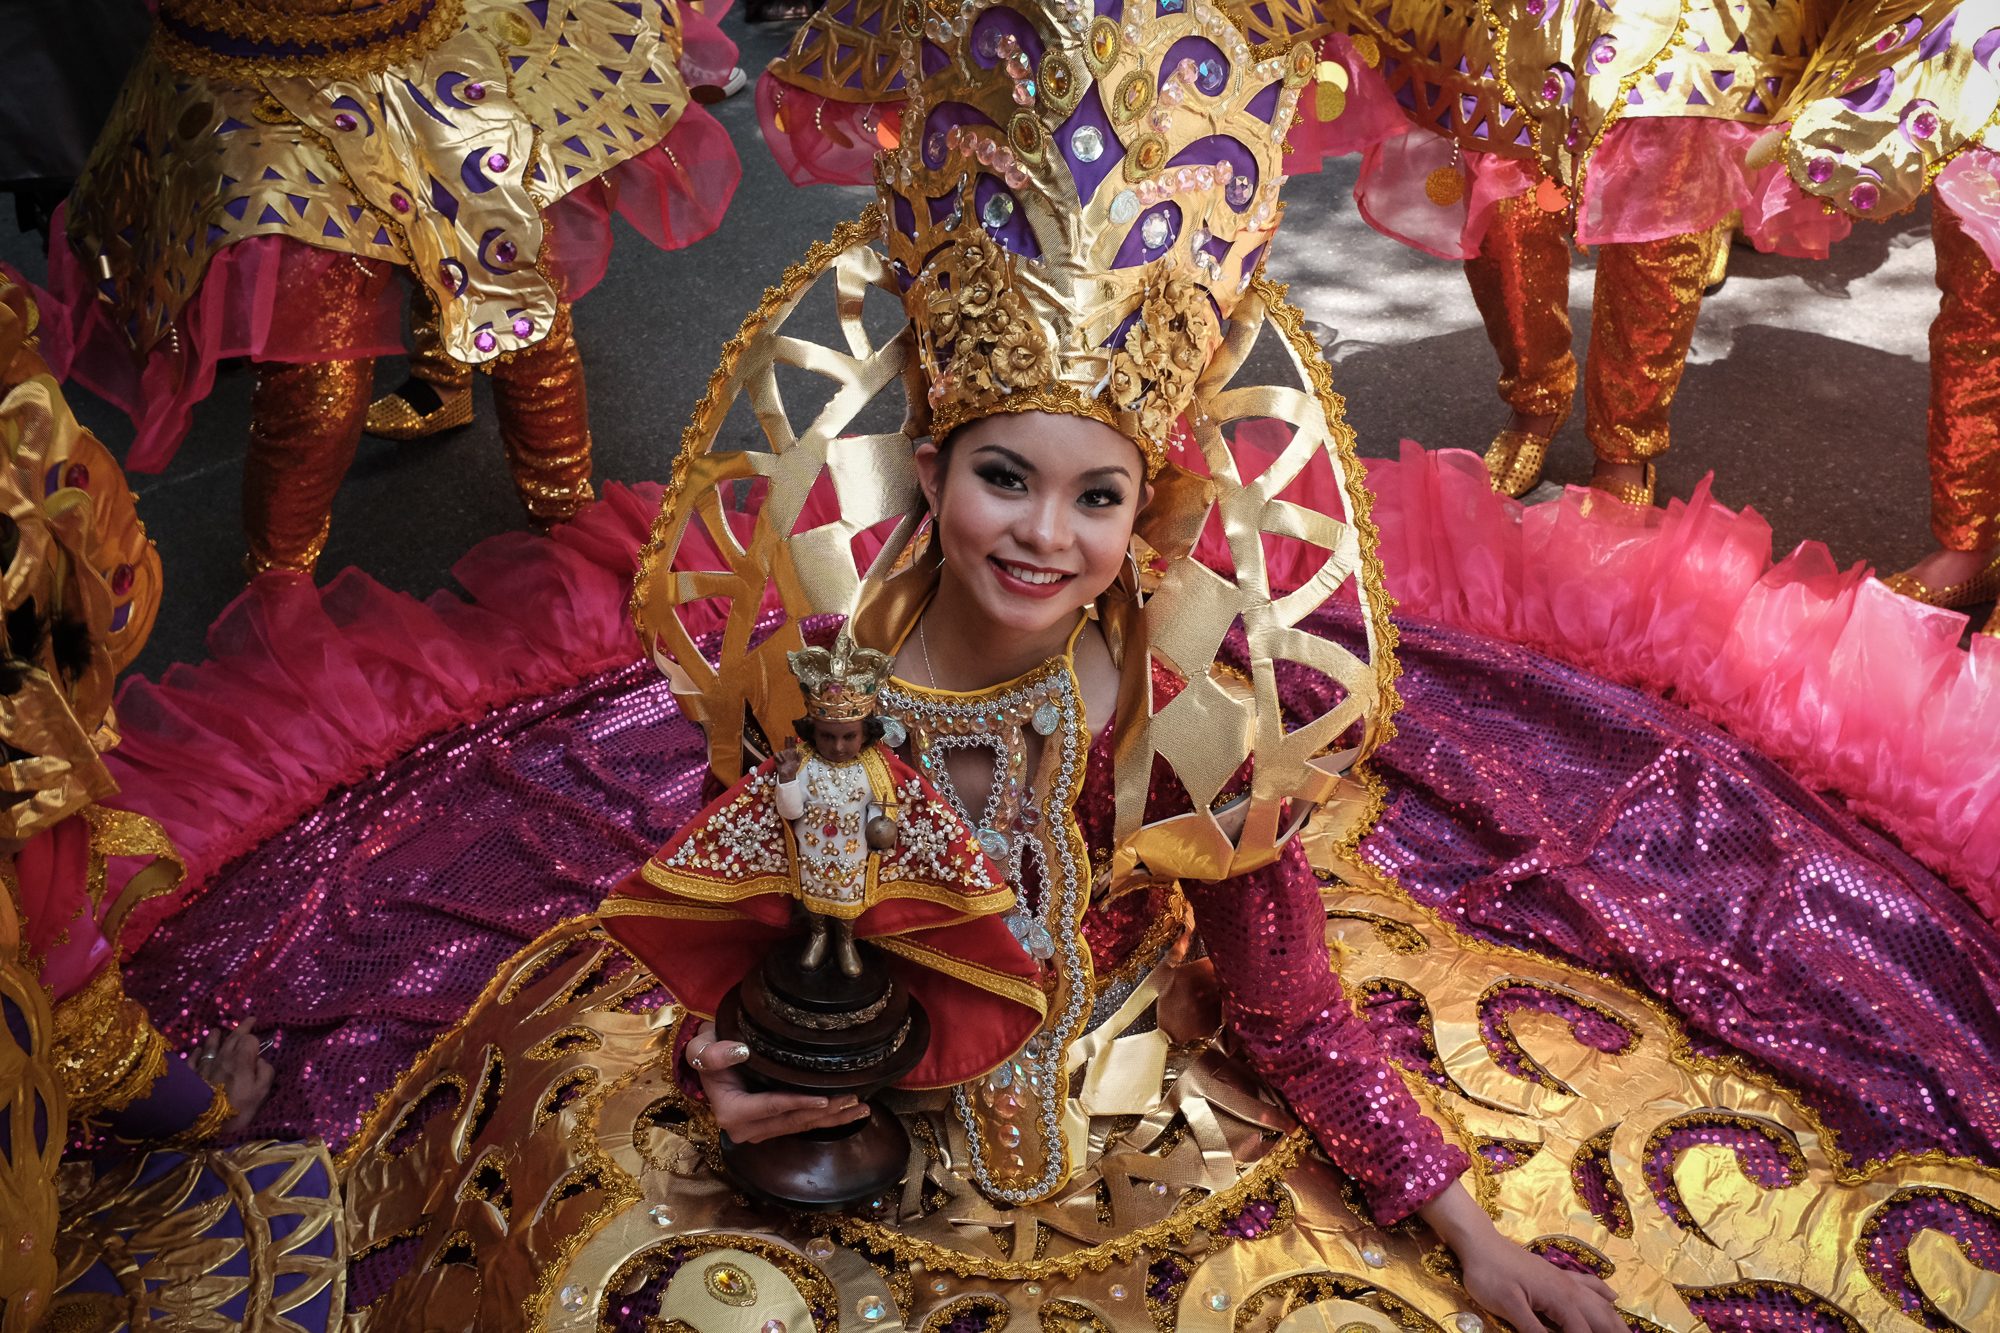 SINULOG. Jessa May Briones, 21, migrates to the US in 2012 and is one of the Sinulog dancers in the parade.  